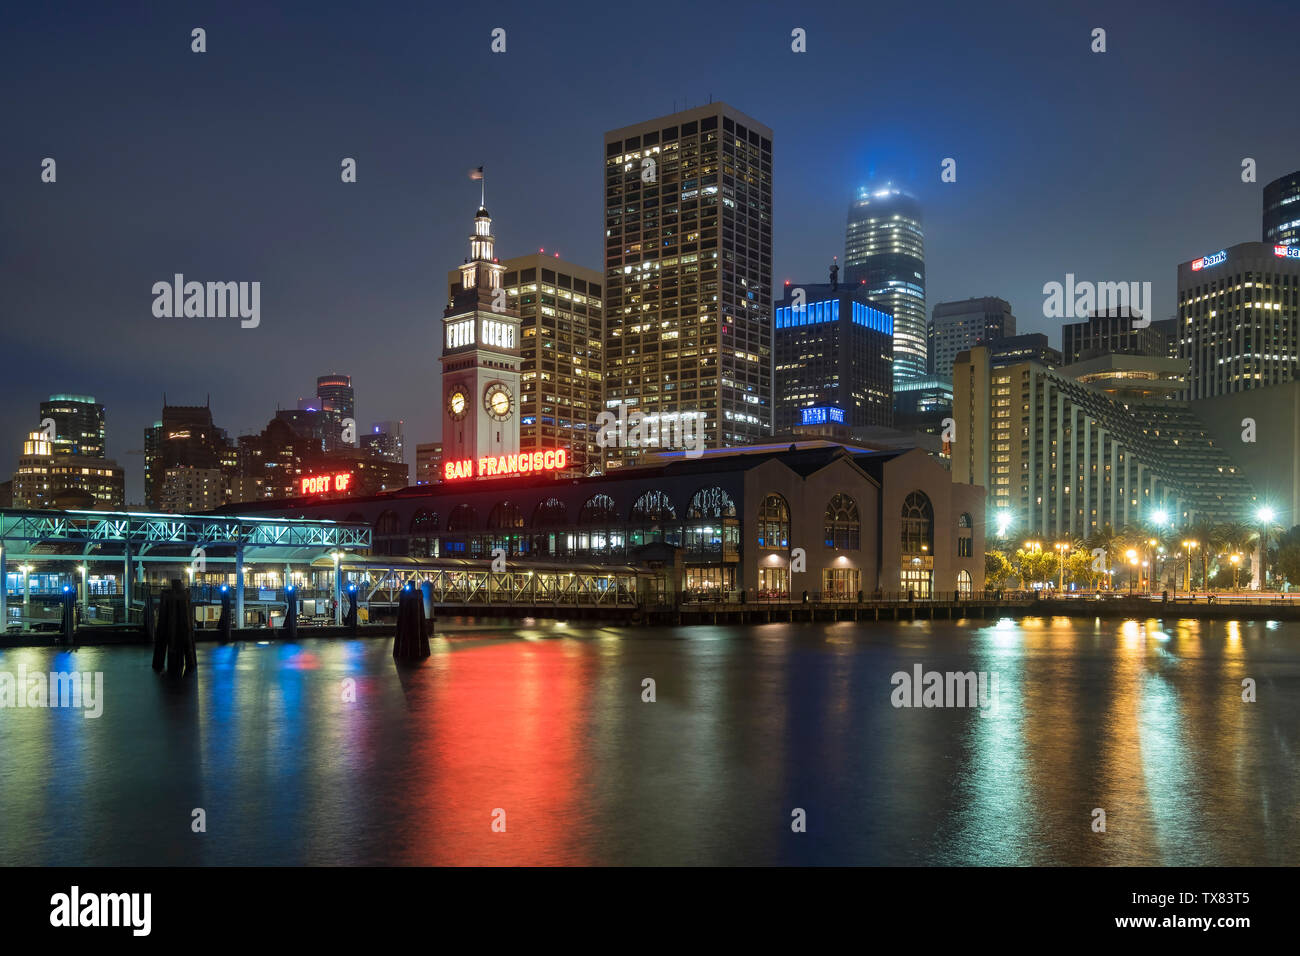 Le Ferry Building et City Skyline at night, San Francisco, California, USA Banque D'Images